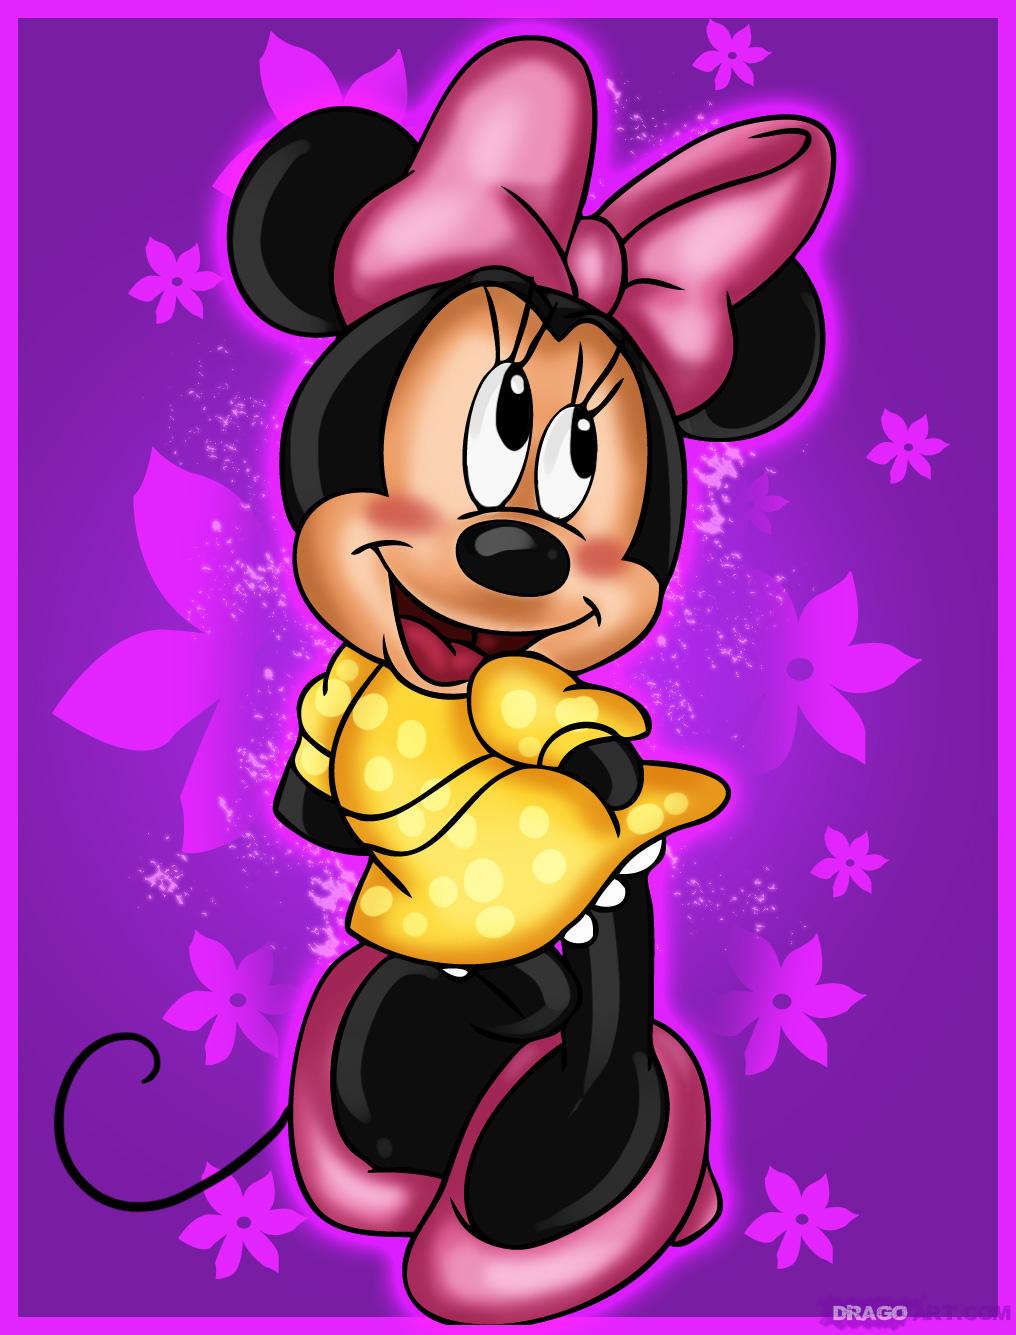 Minnie Mouse Cartoon Full HD Image Wallpaper for Galaxy Note ...